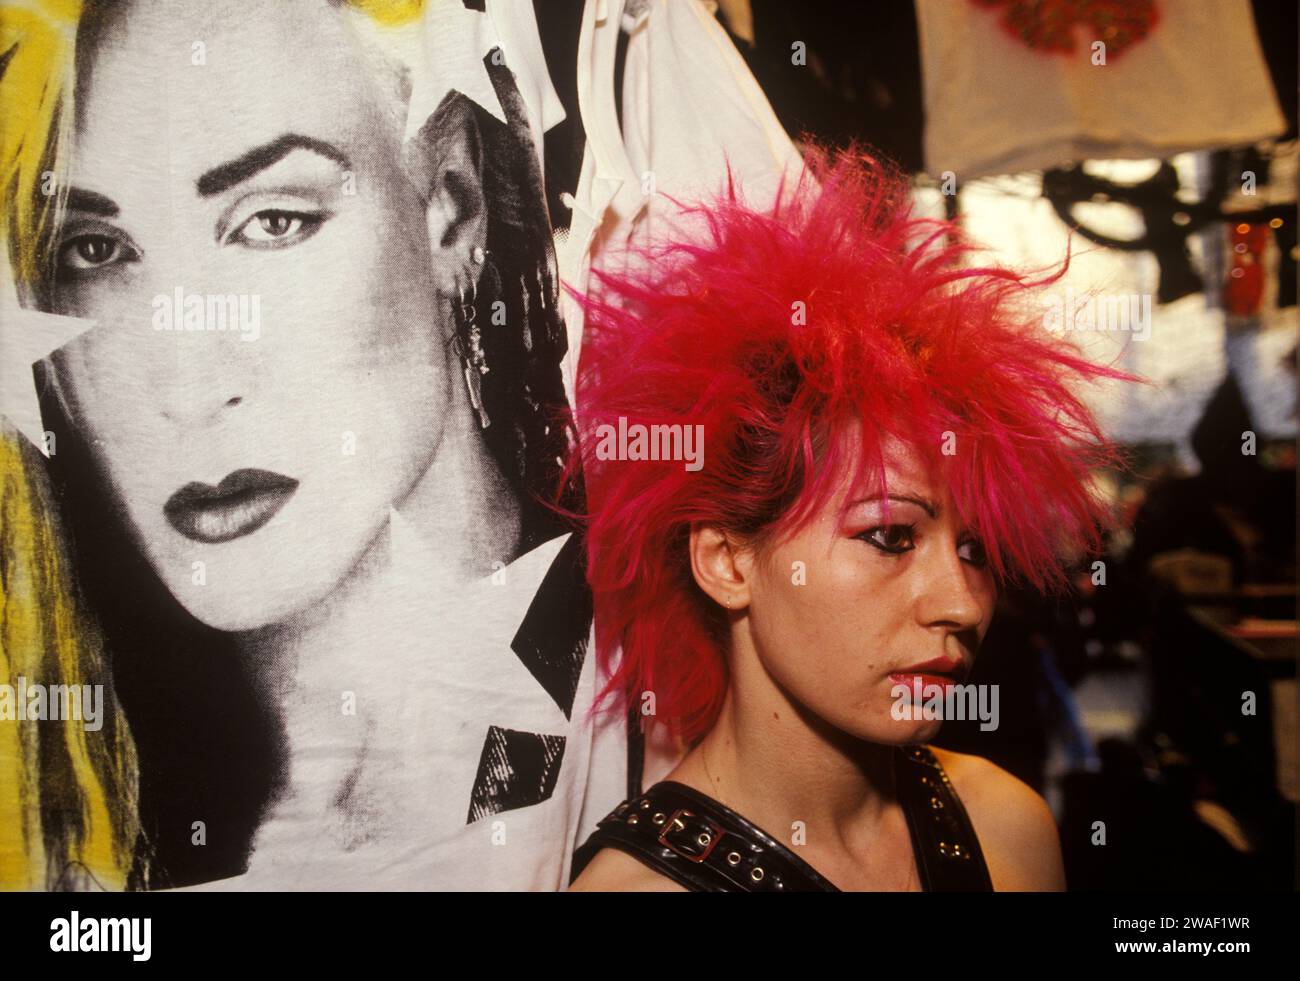 Punk teenage girls shop assistant in Boy at 153  Kings Road, Chelsea boutique, 1980s. Spiky bright red backcombed punk hair and looking mournful, under the poster of Peter Robinson a British Jamaican pop singer; better know as Marilyn, who was at the forefront of the New Romantic movement. Chelsea, London, England 1983 HOMER SYKES Stock Photo